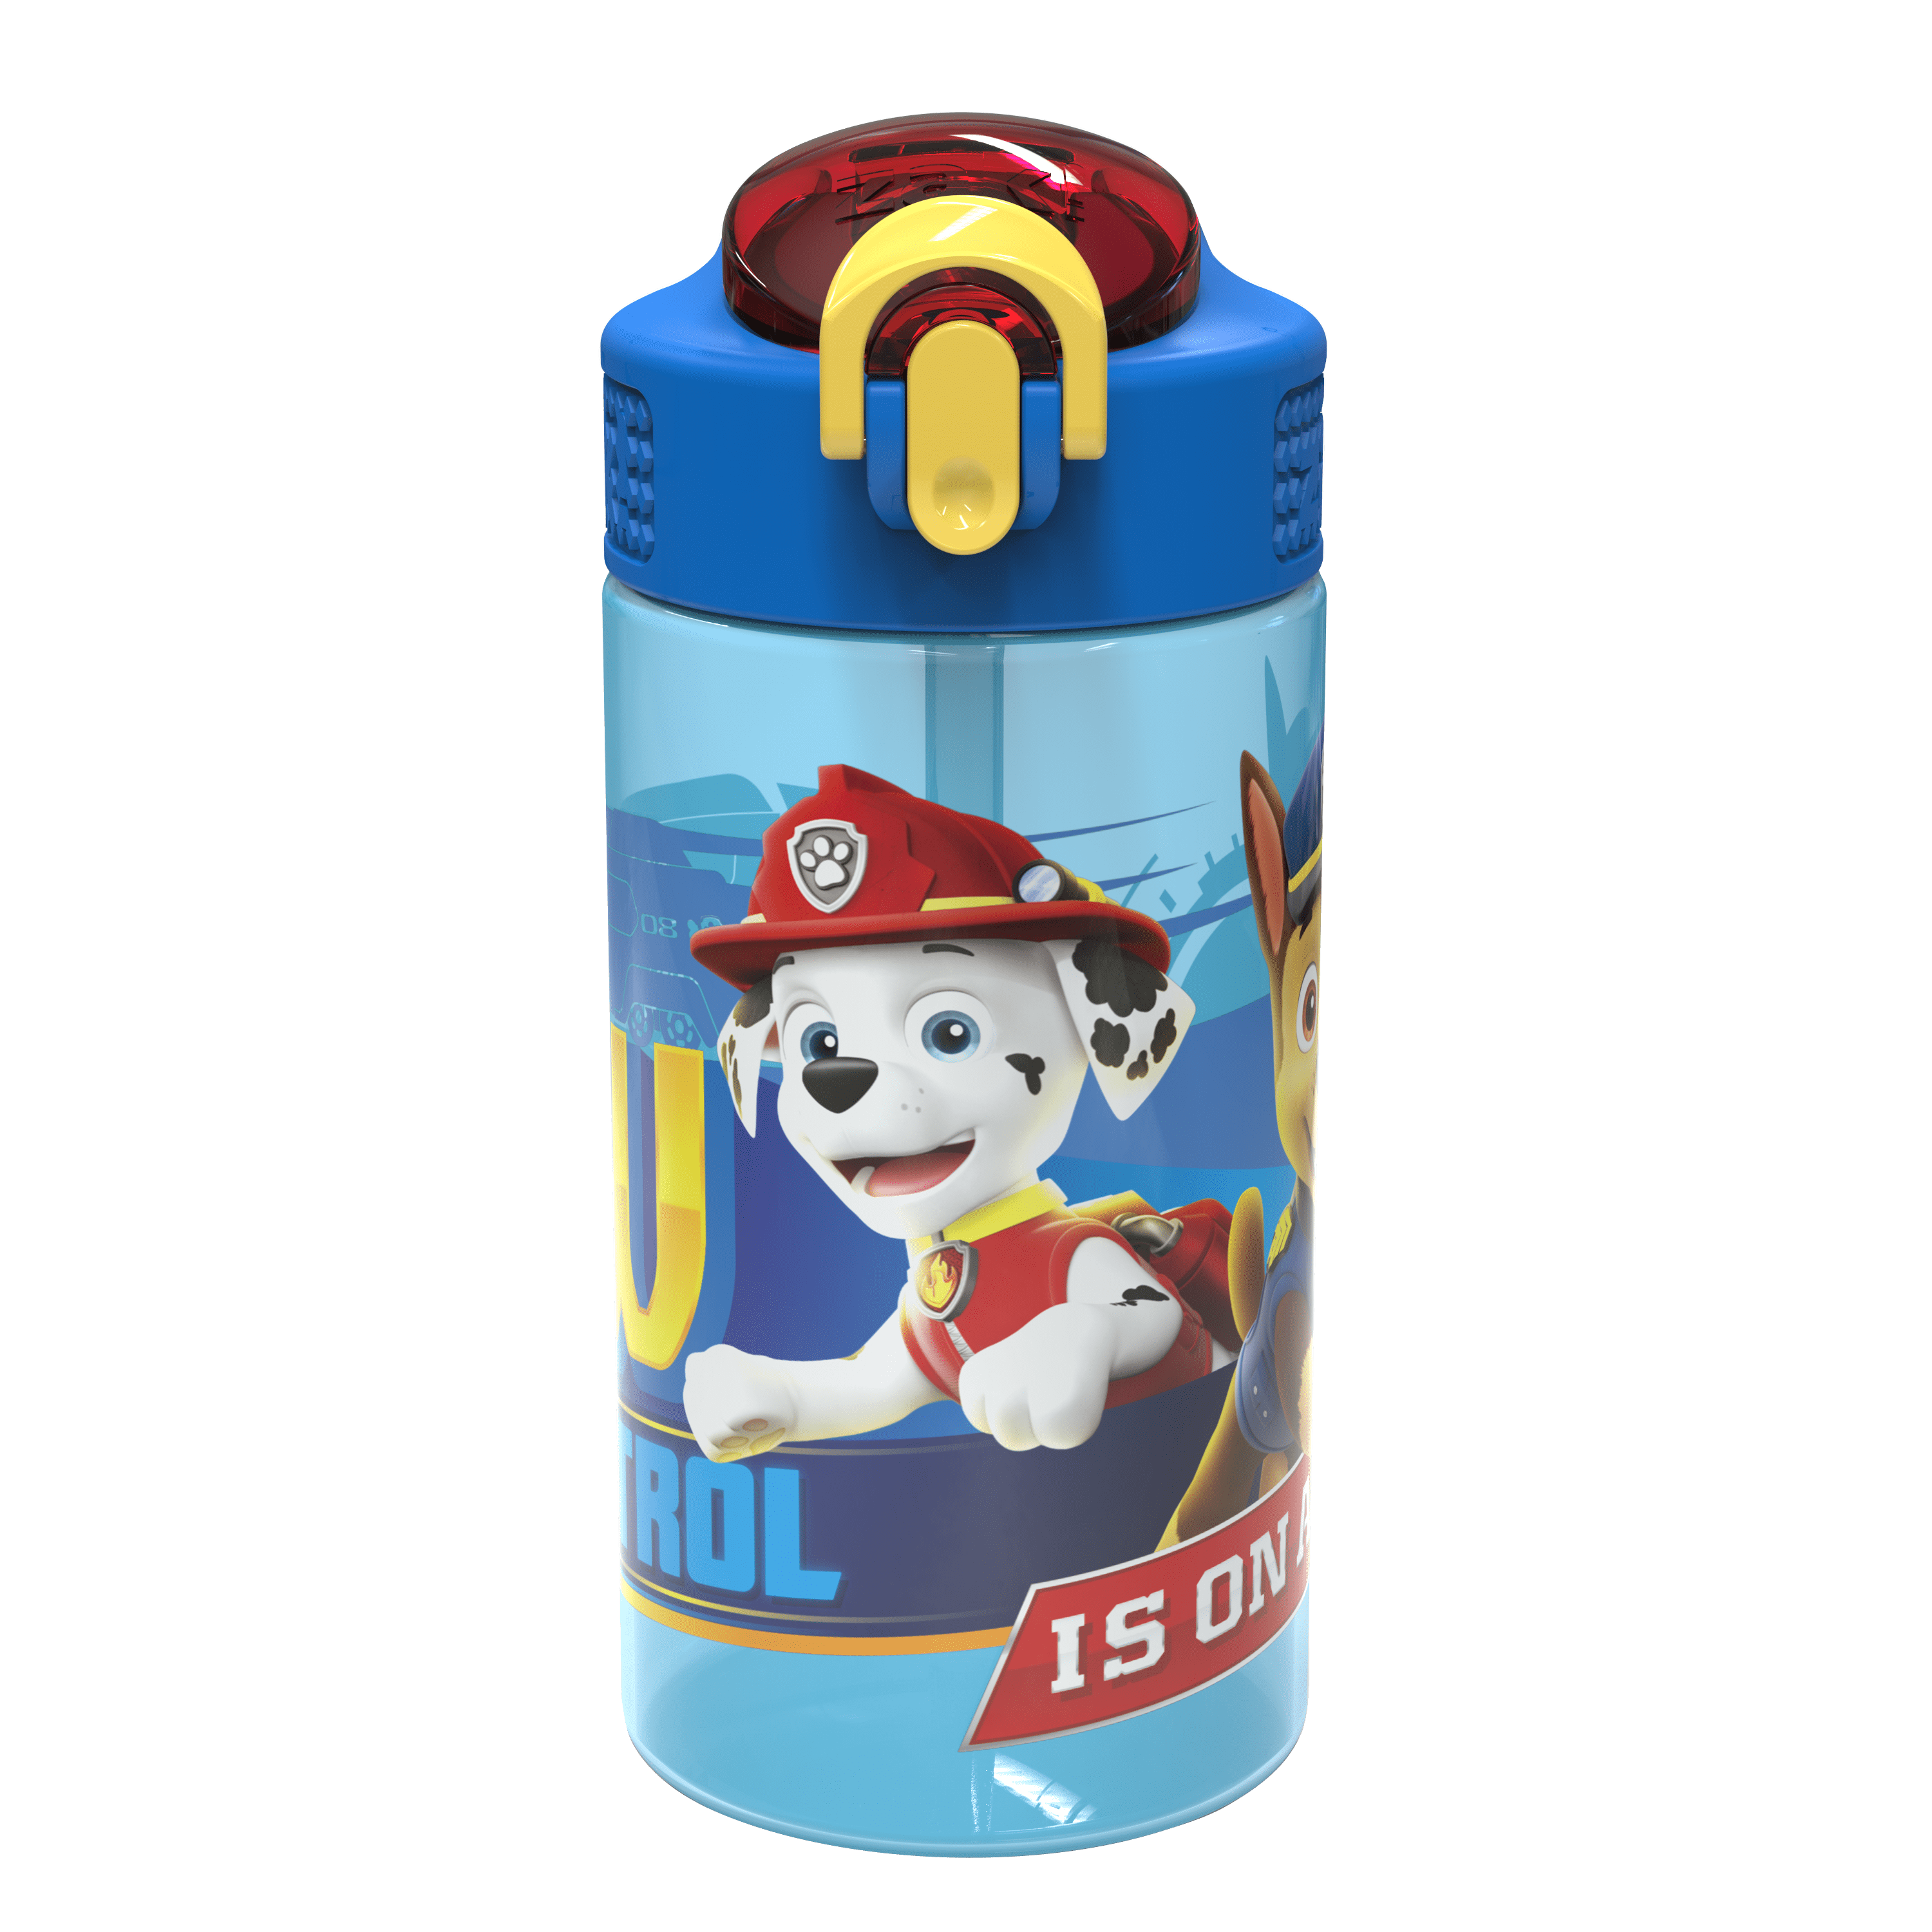 Zak Designs Sonic the Hedgehog Kids Water Bottle with Spout Cover and  Built-in Carrying Loop Made of Durable Plastic Leak-Proof Water Bottle  Design for Travel (17.5 oz Non-BPA Pack of 2)